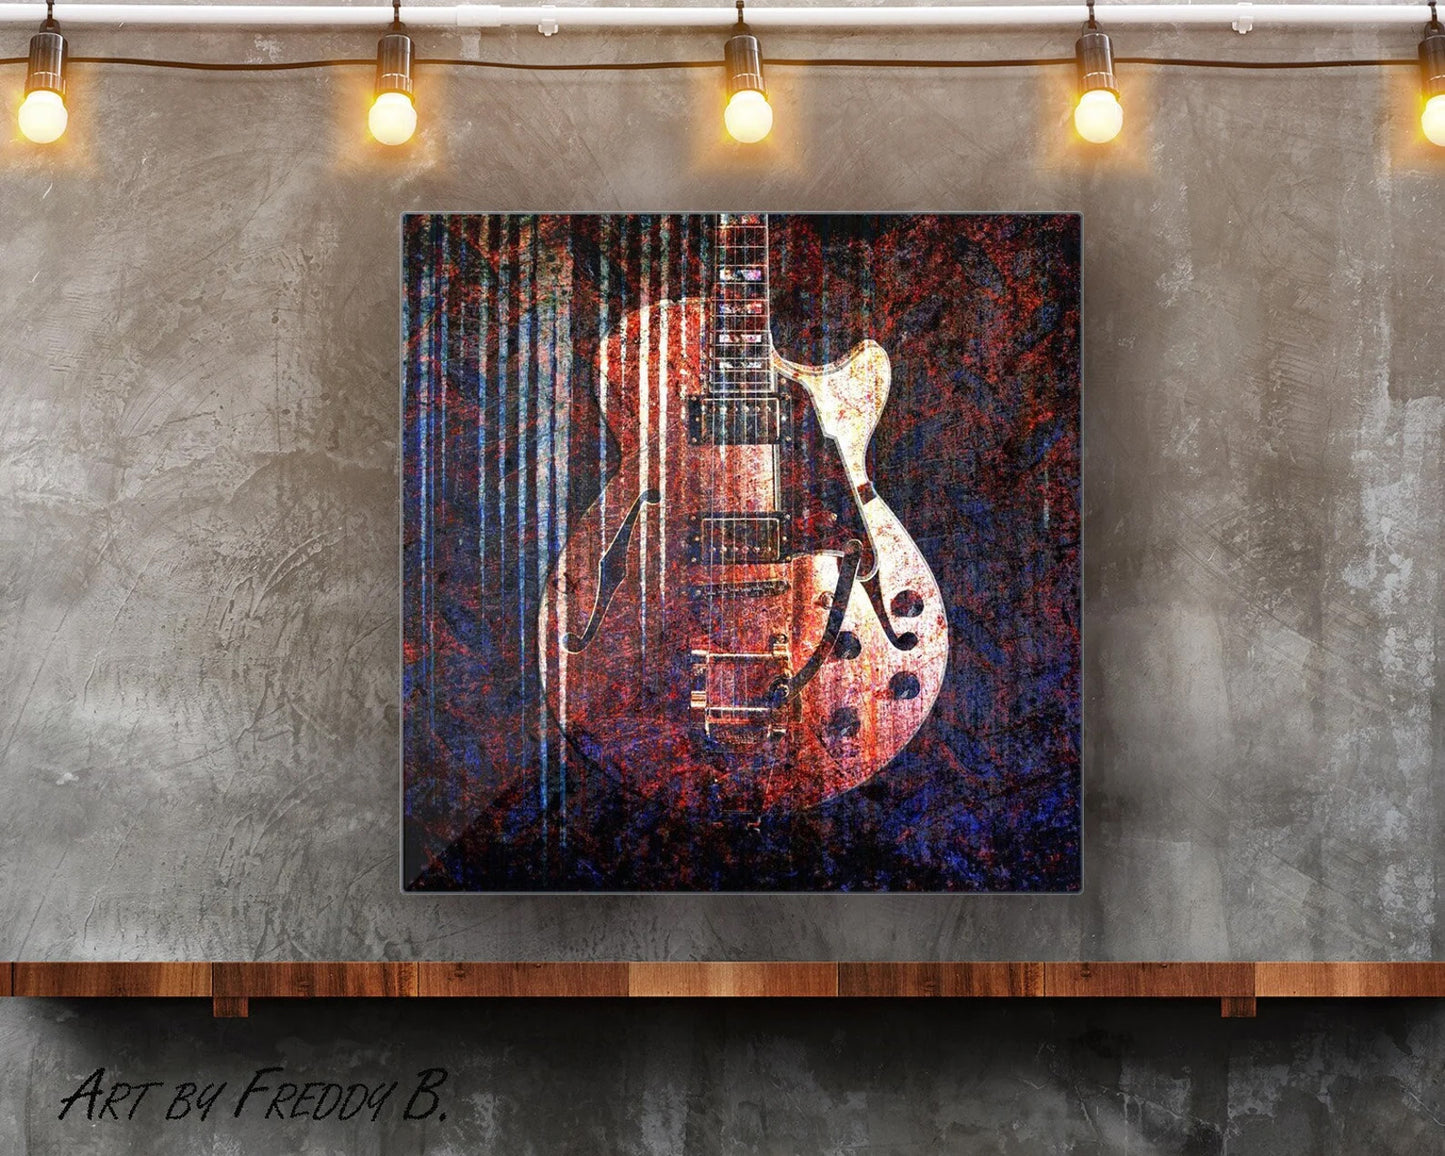 Electric Guitar Grunge Red and Blue Filters Printed on Eco-Friendly Recycled Aluminum hung